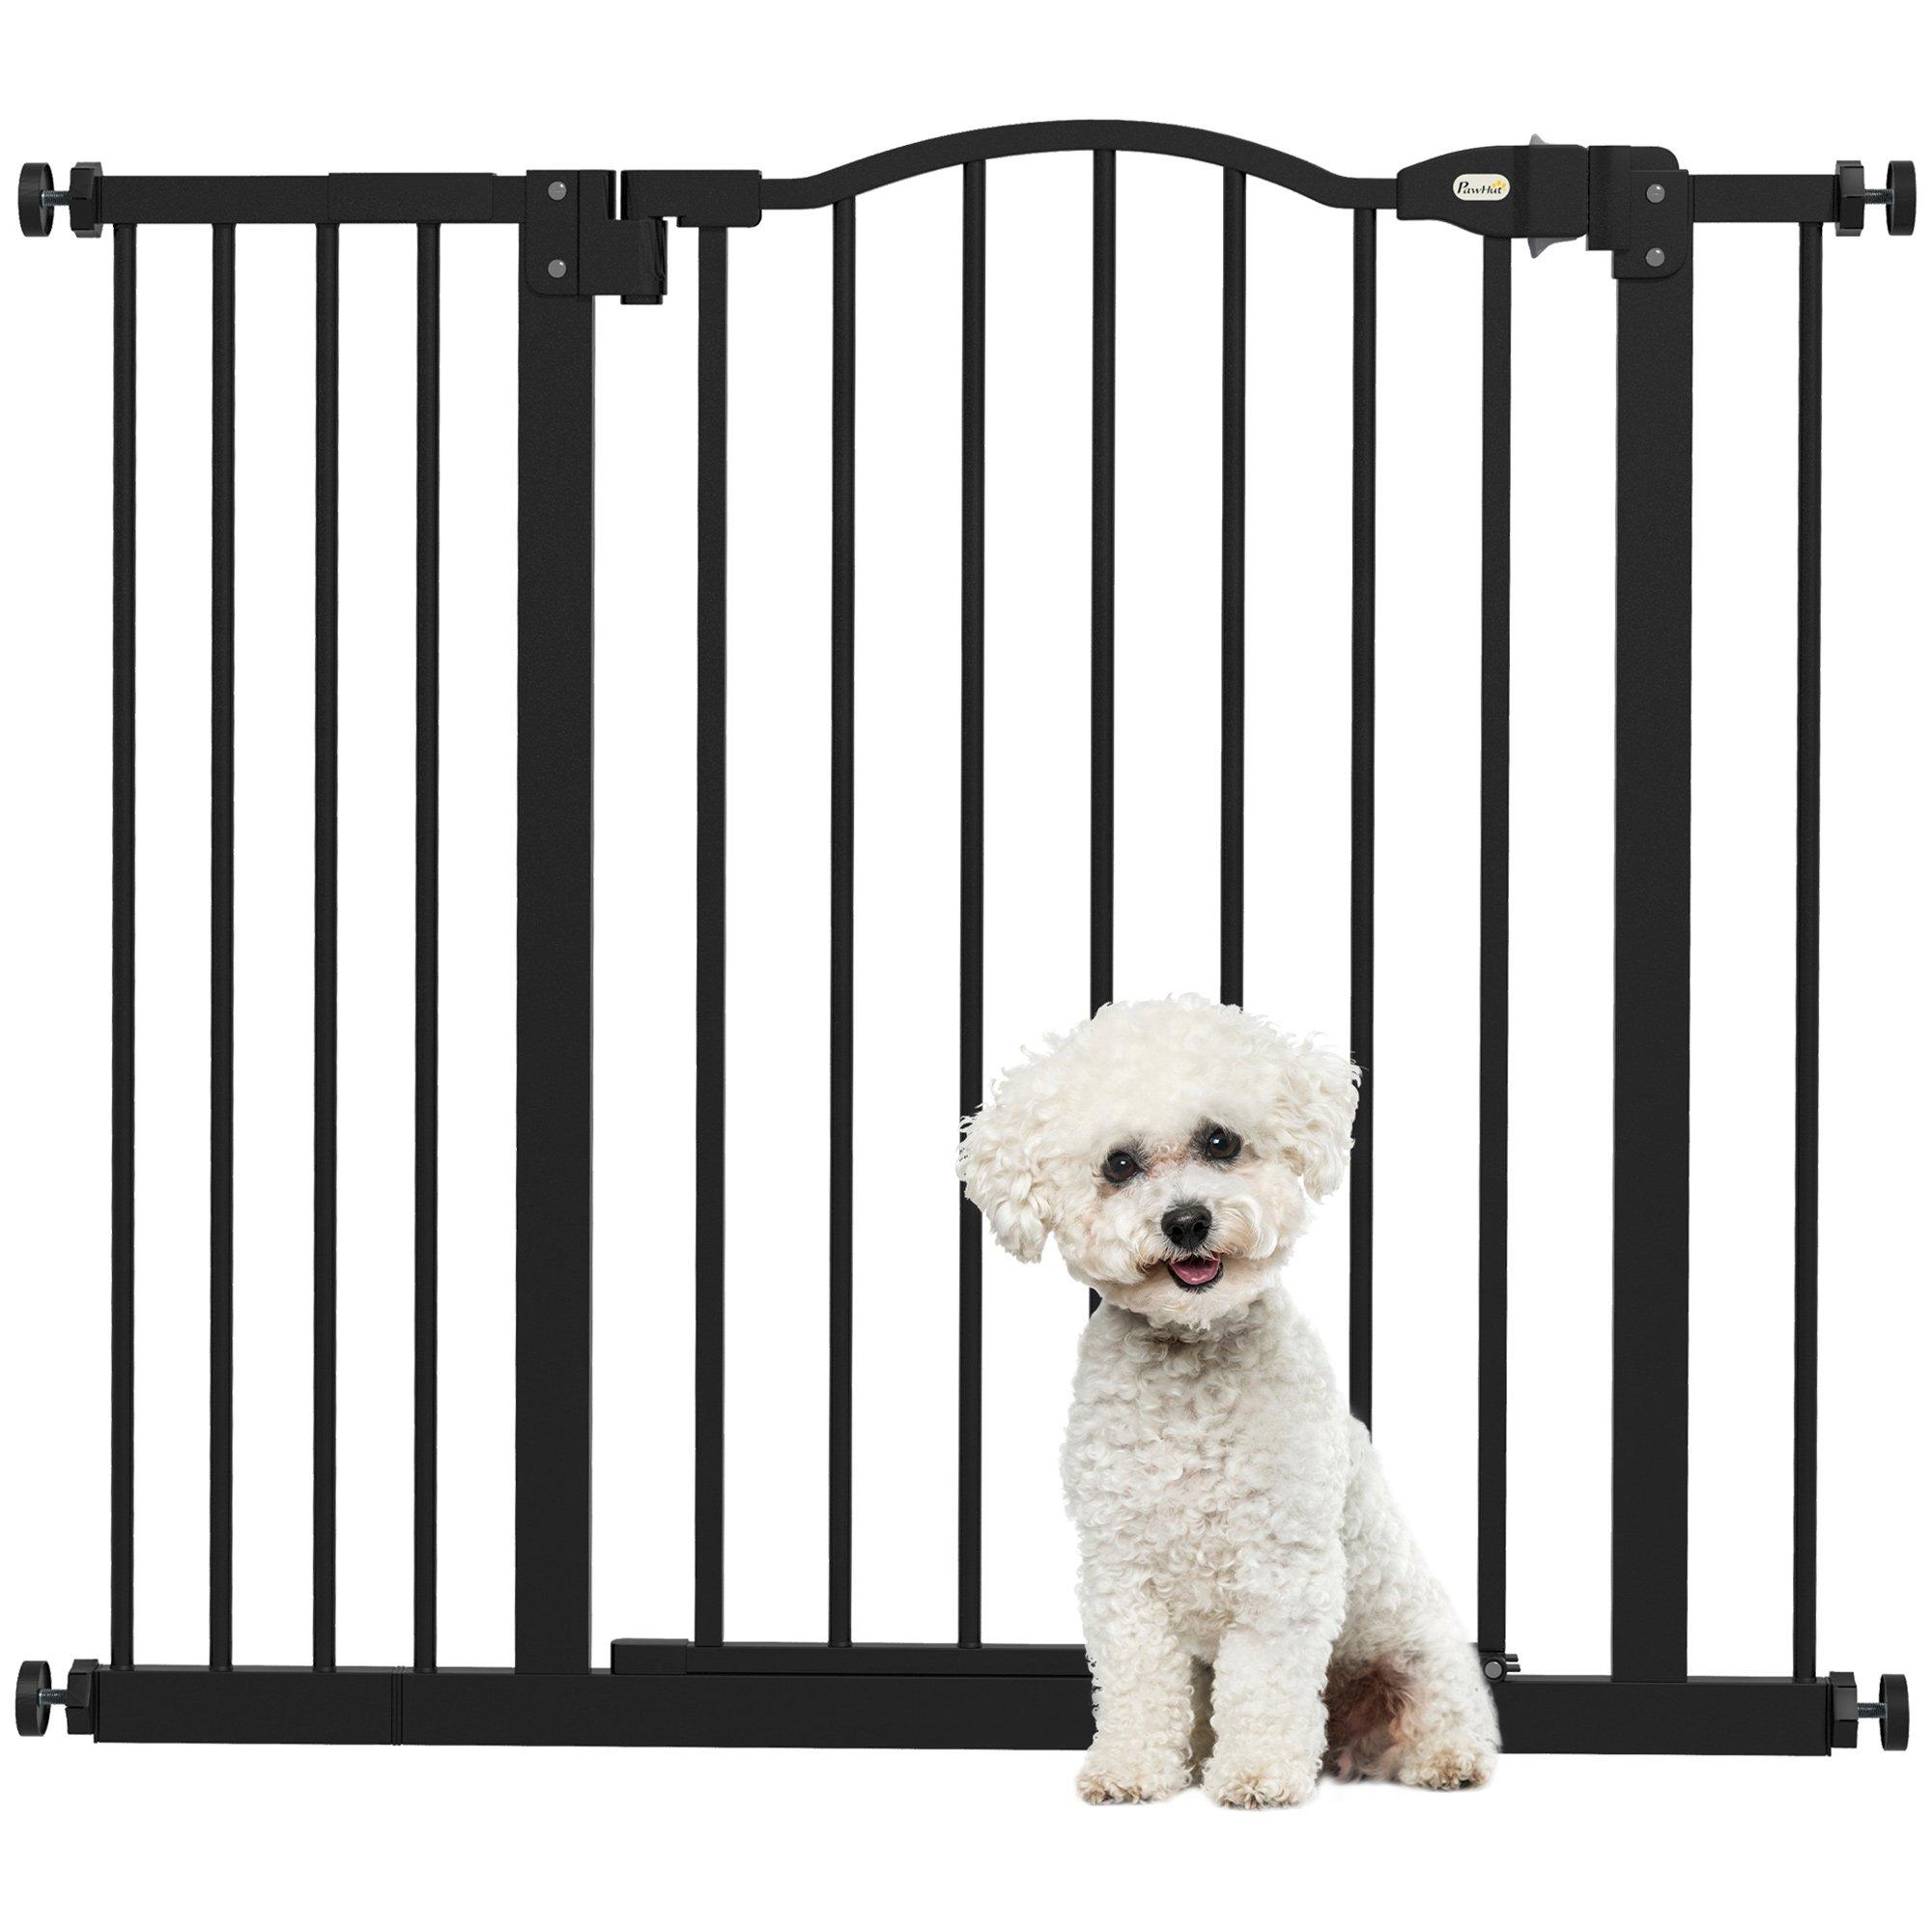 74-94cm Adjustable Metal Pet Gate Safety Barrier with Auto-Close Door